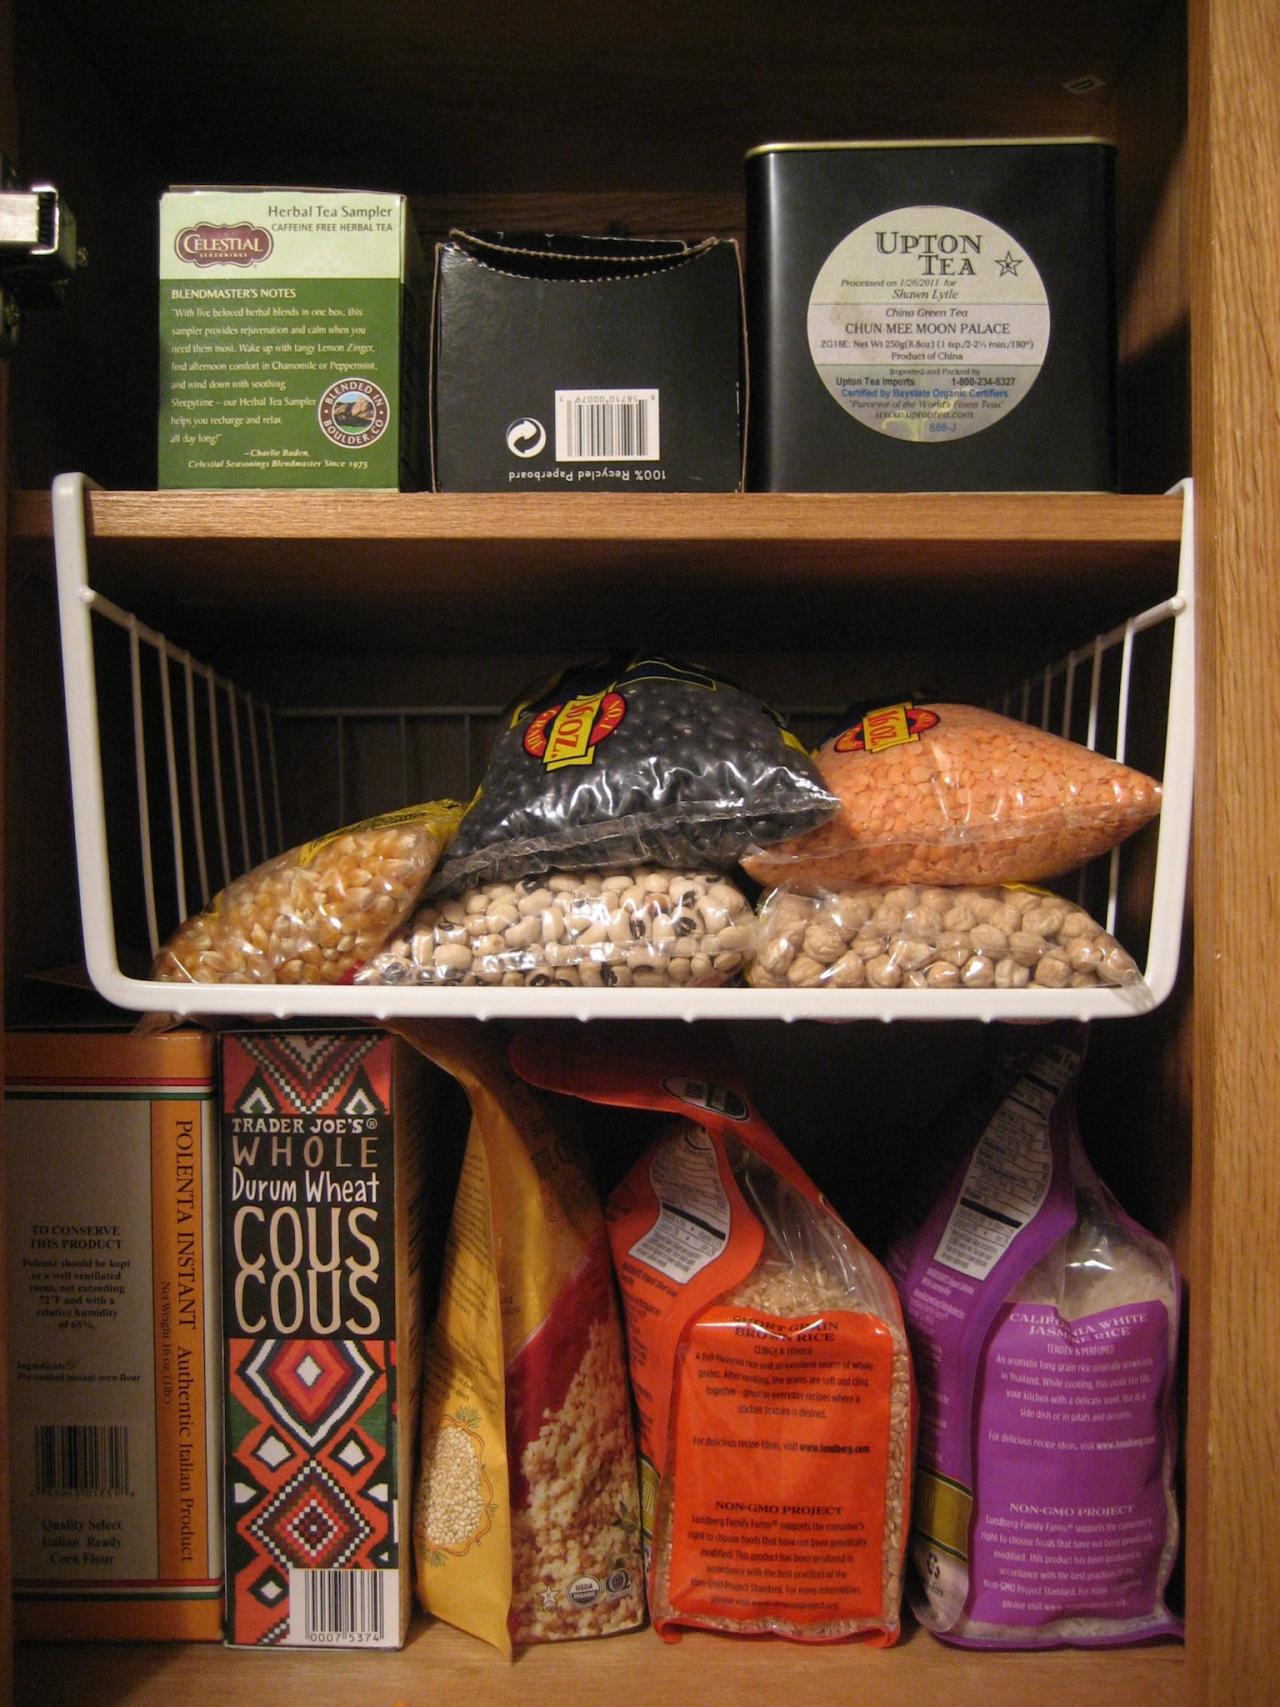 Maximize Pantry Space with These Clever Pantry Storage Ideas